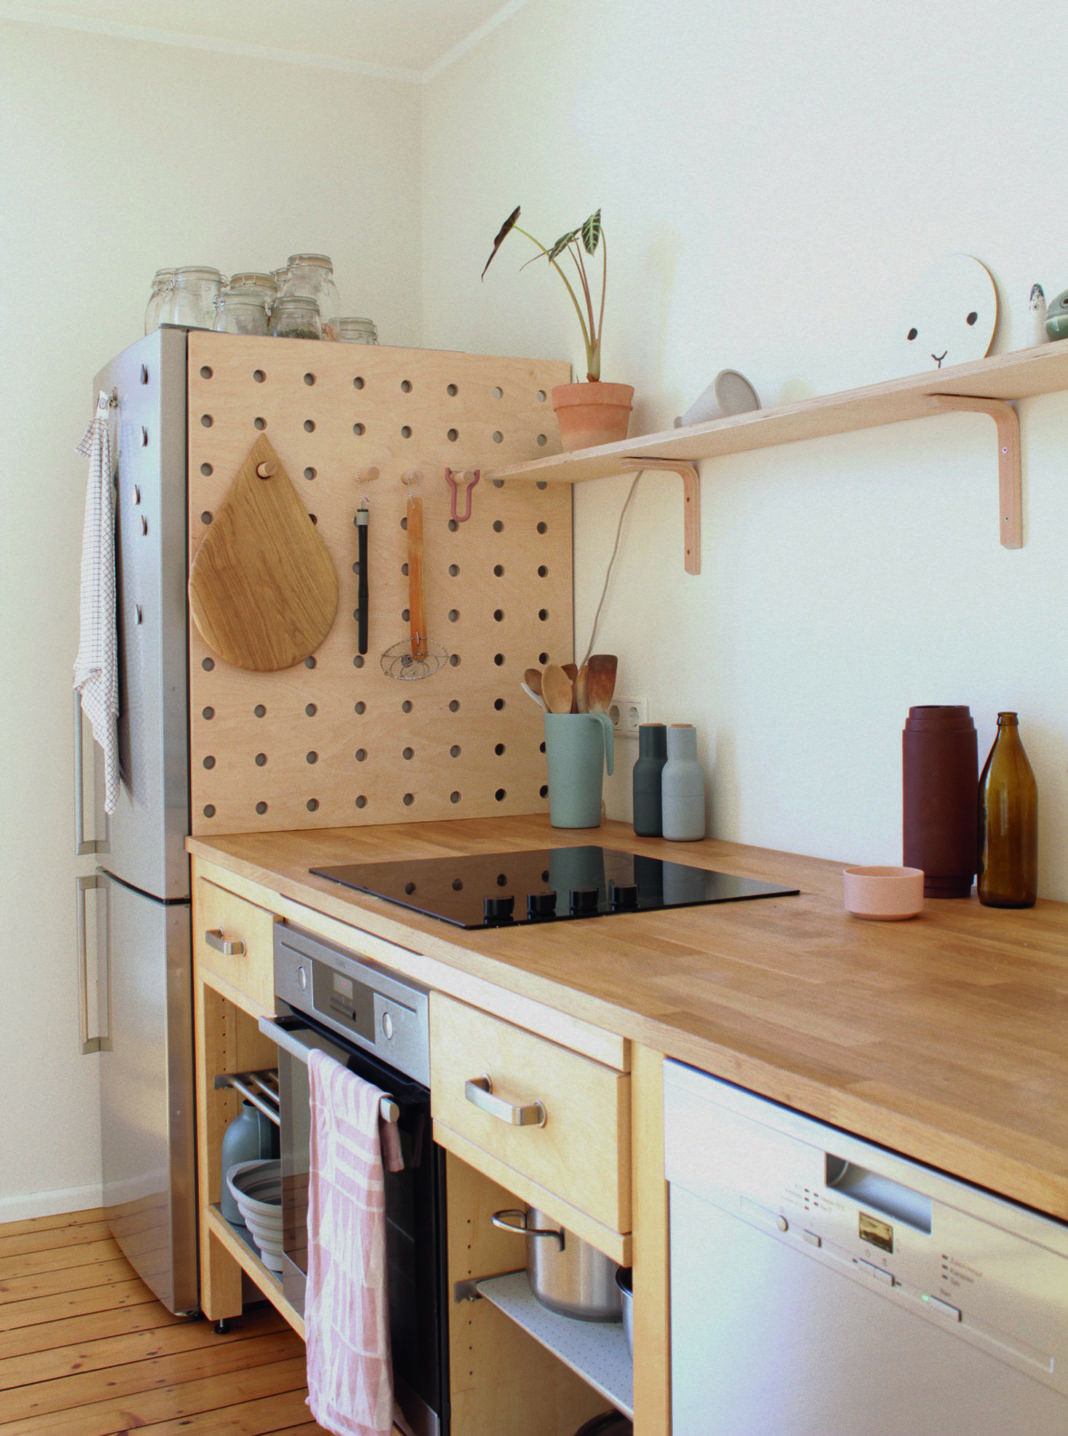 Remodeling 101: What to Know When Replacing Your Fridge - Remodelista